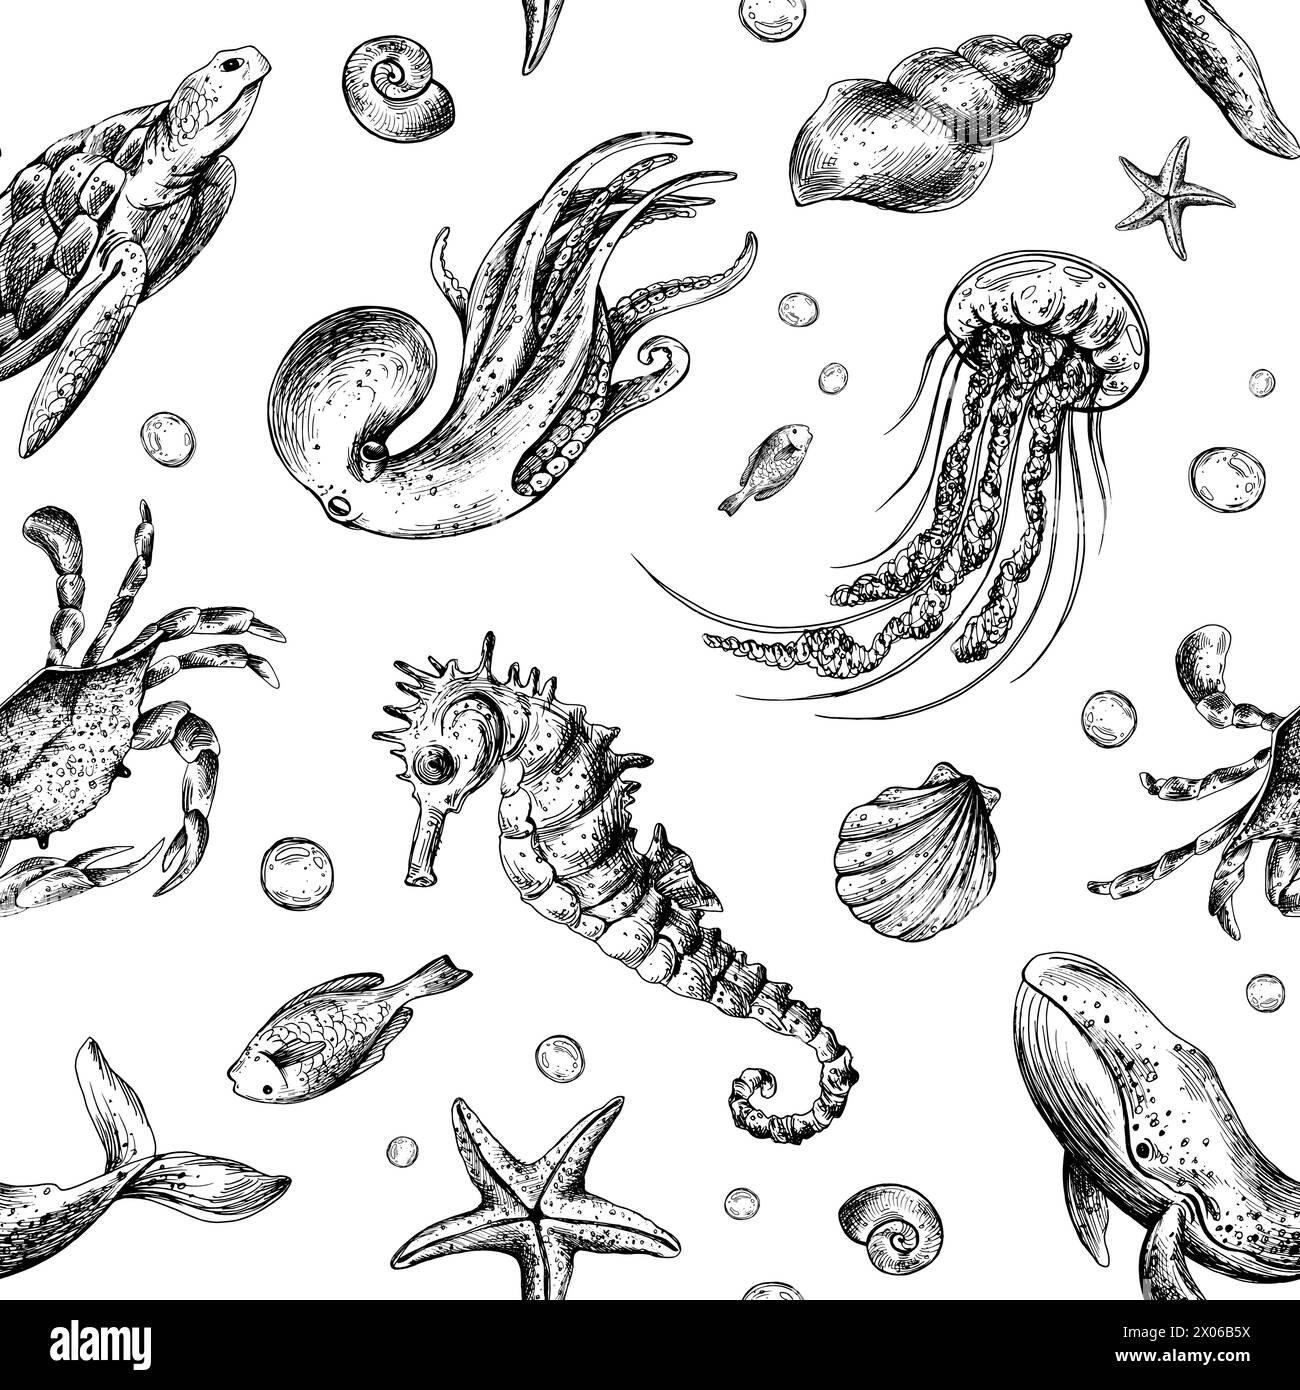 Underwater world clipart with sea animals whale, turtle, octopus, seahorse, starfish, shells, coral and algae. Graphic illustration hand drawn in Stock Vector